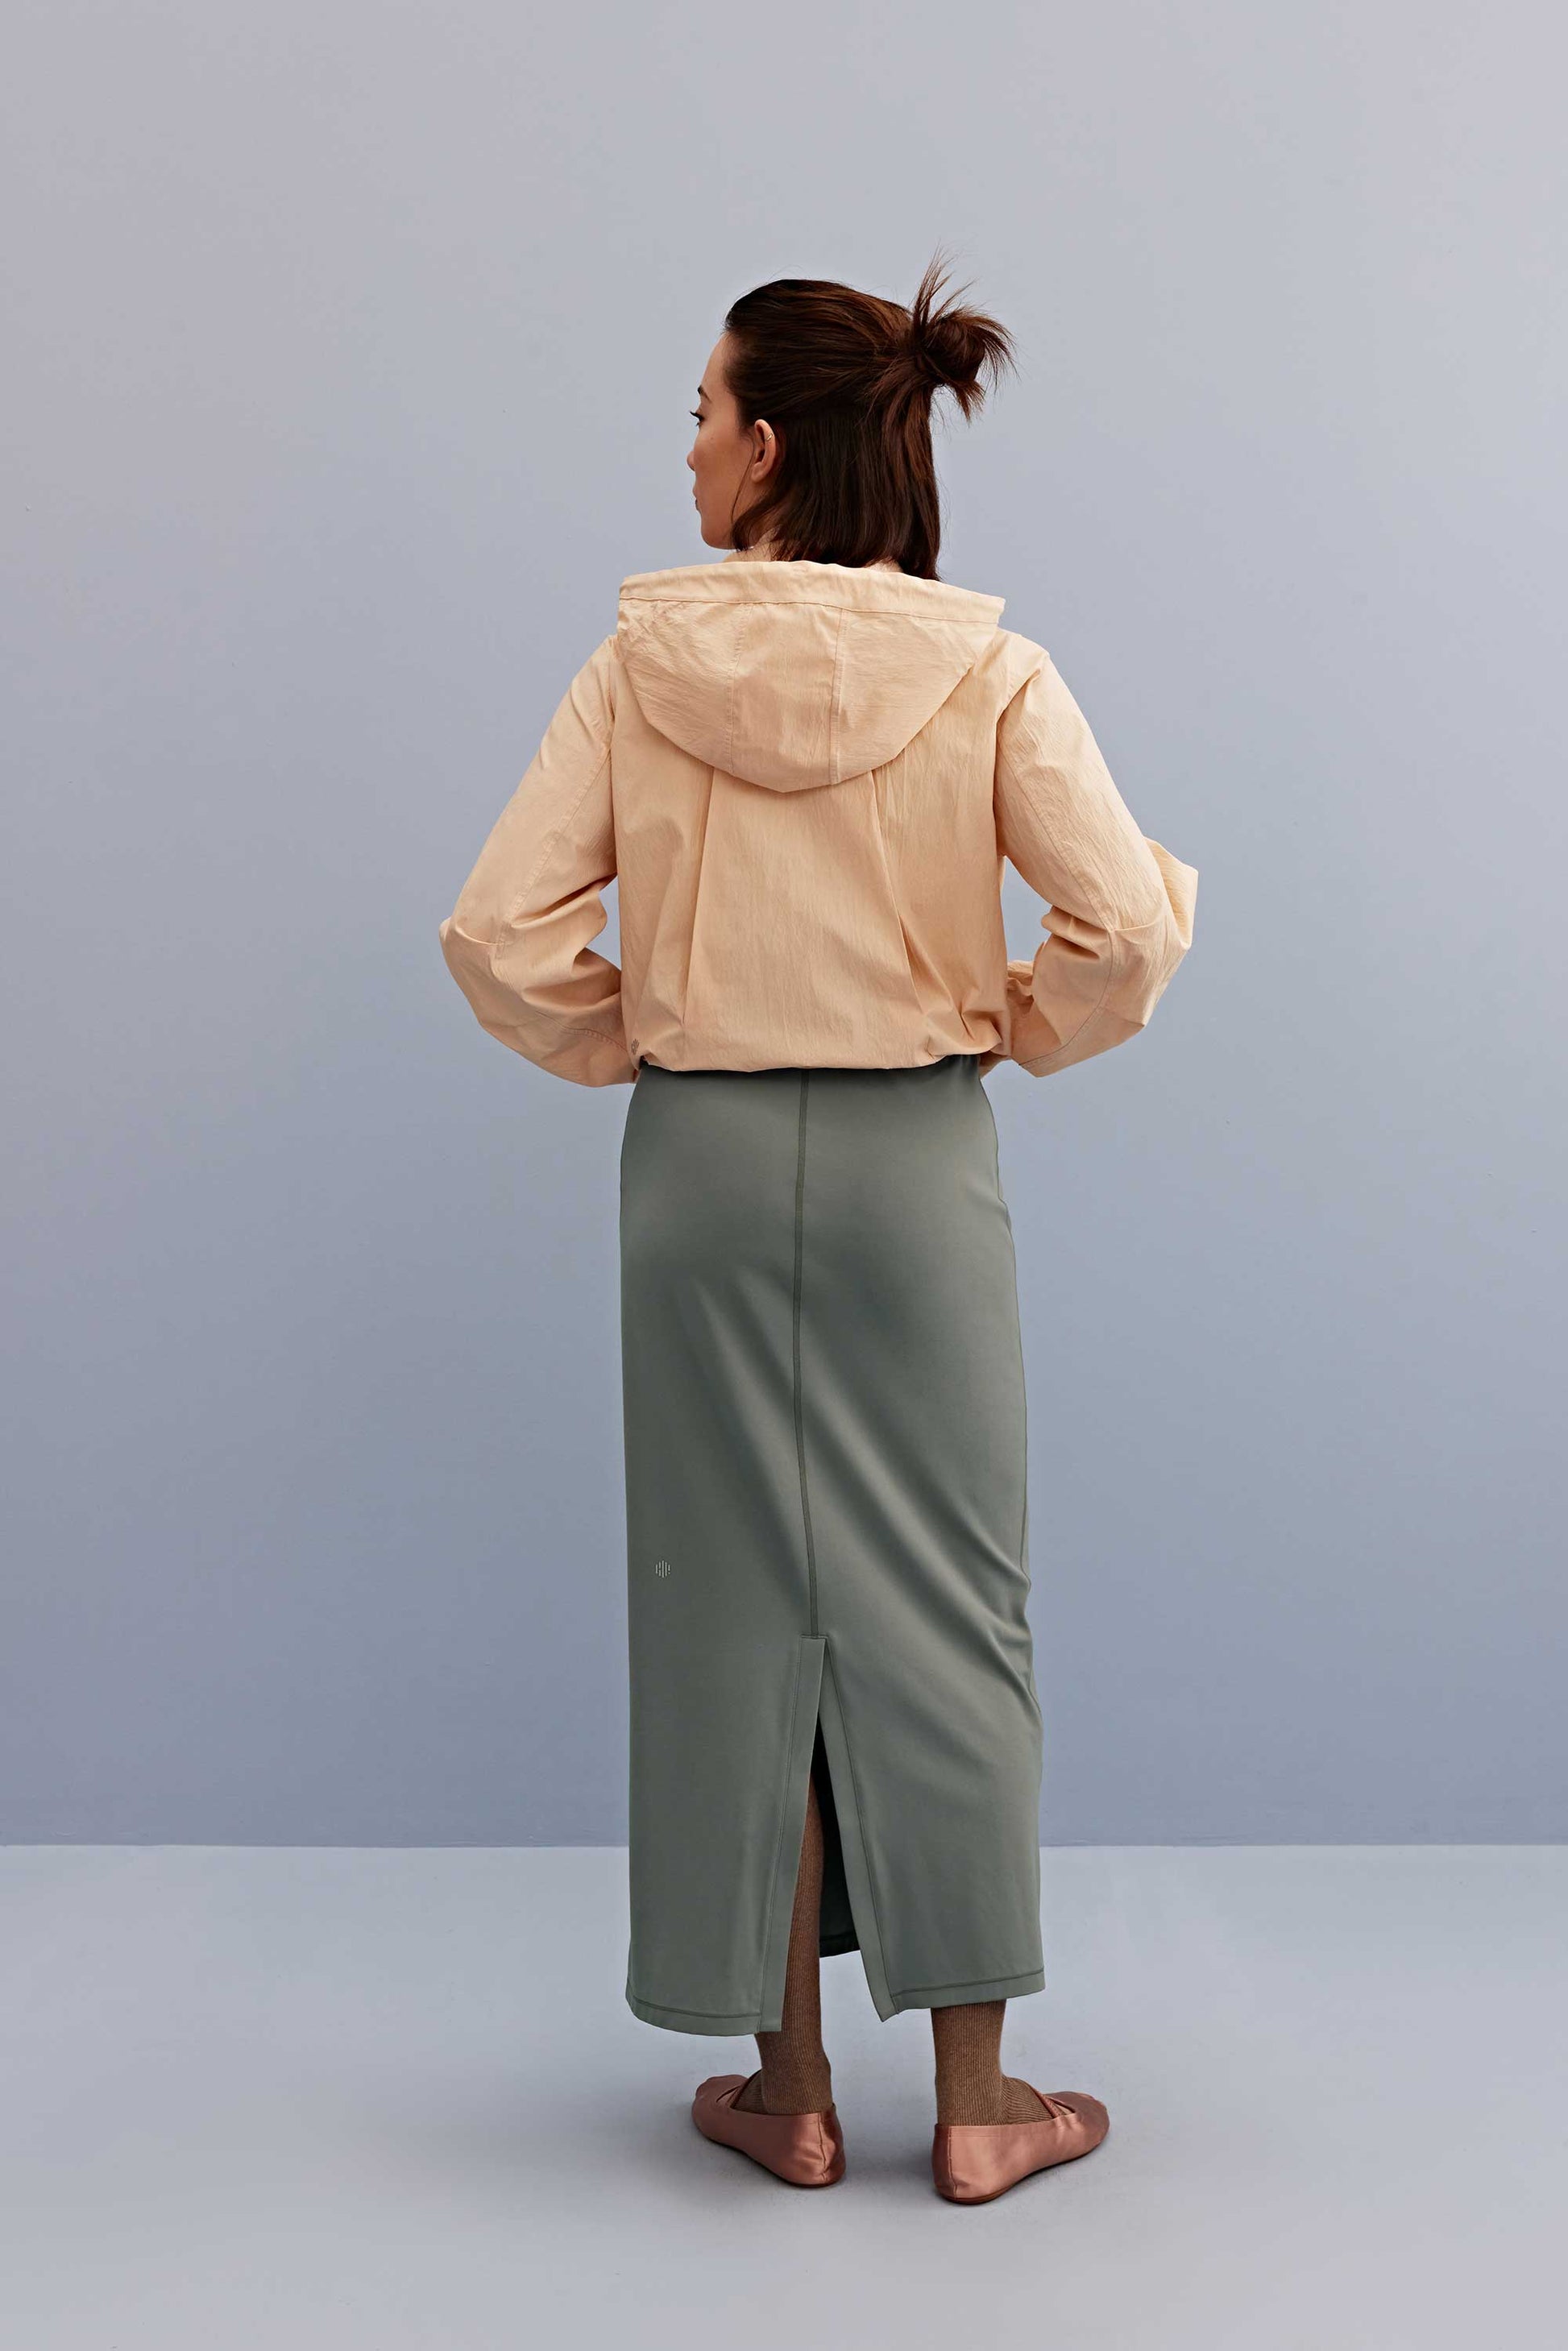 back of a woman wearing the warm yellow jacket and green skirt